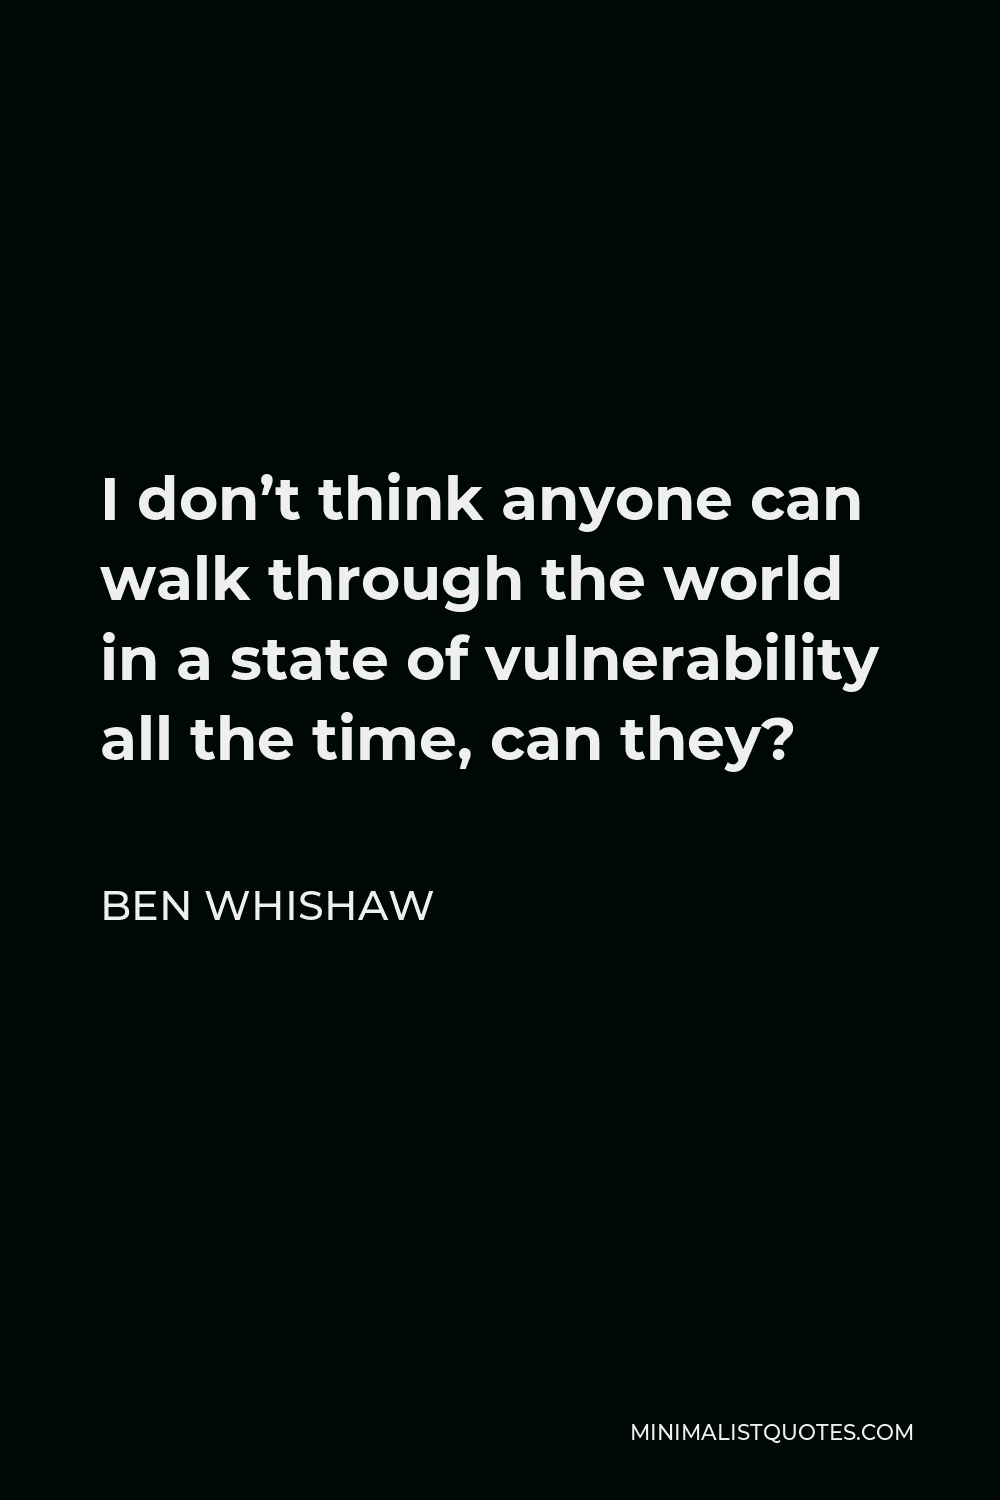 Ben Whishaw Quote - I don’t think anyone can walk through the world in a state of vulnerability all the time, can they?